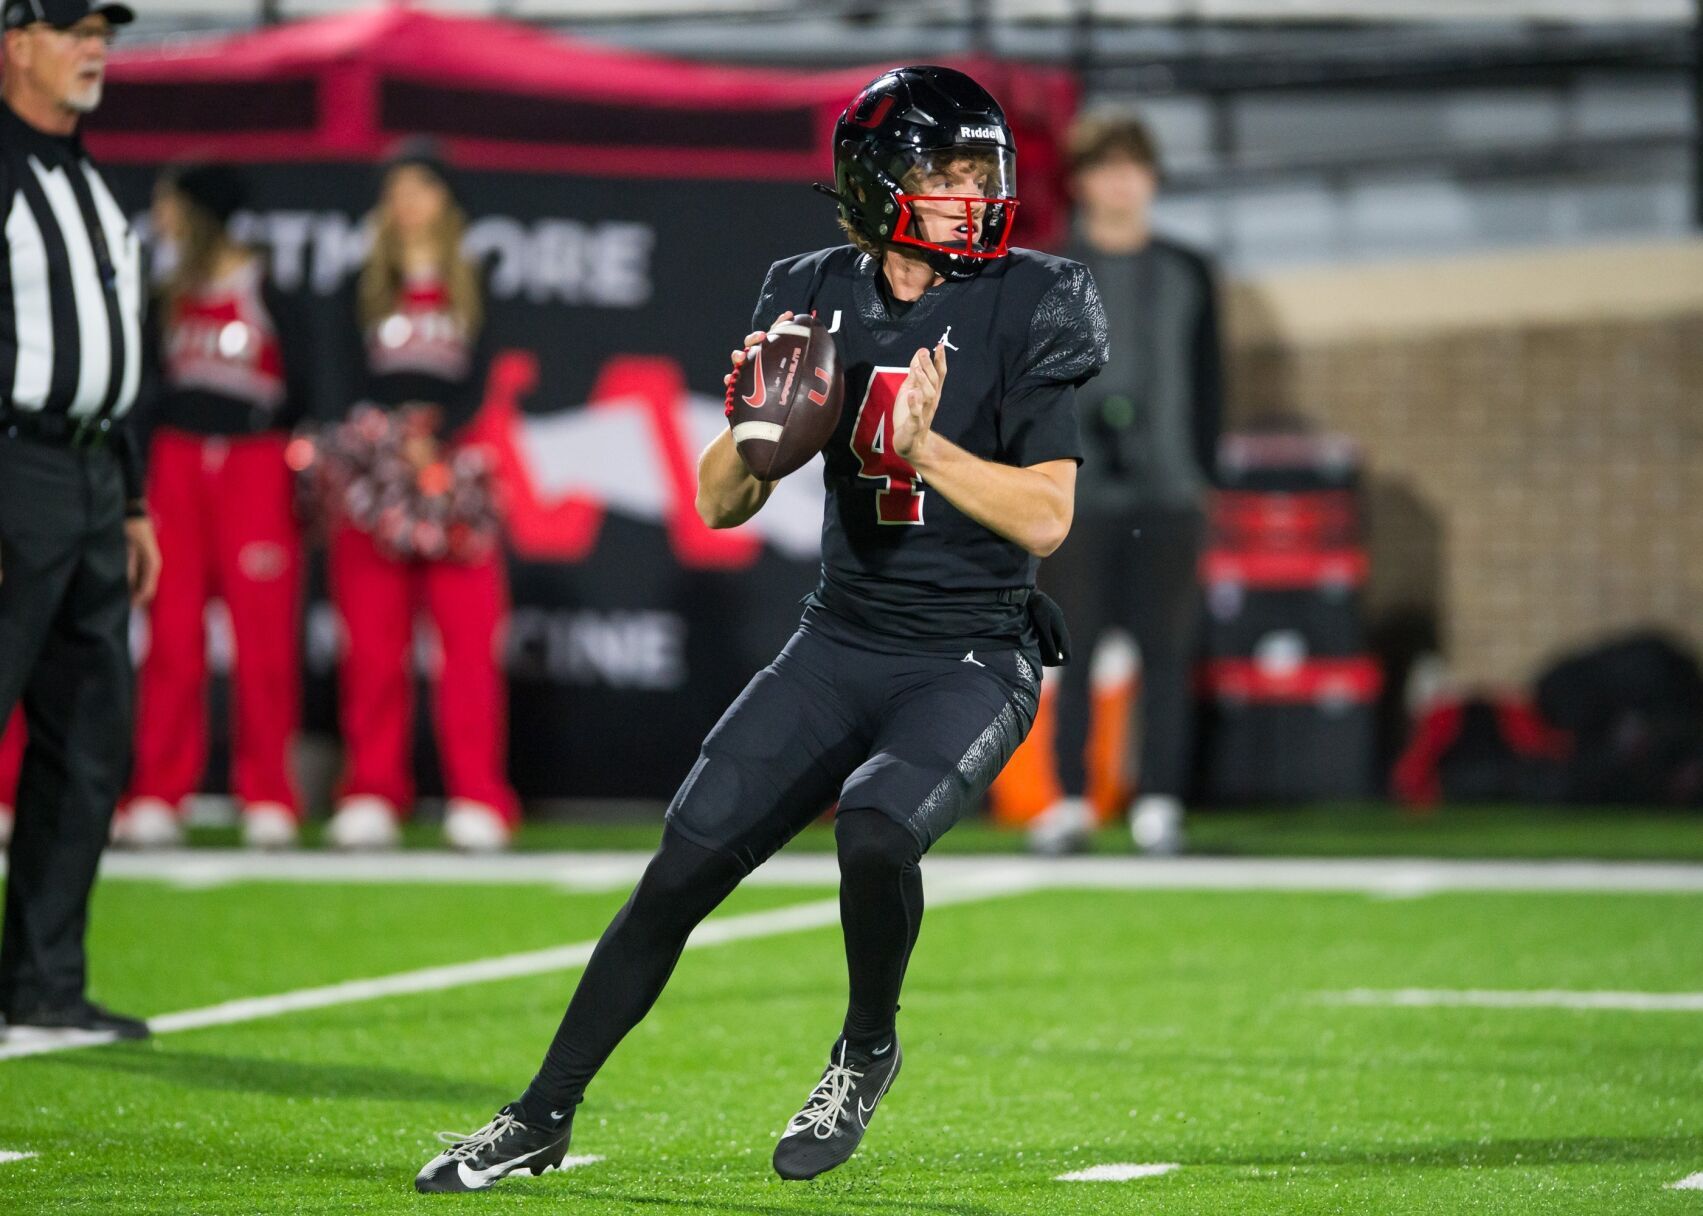 Utah lands top QB prospect Shaker Reisig, a standout with 6,500 yards passing